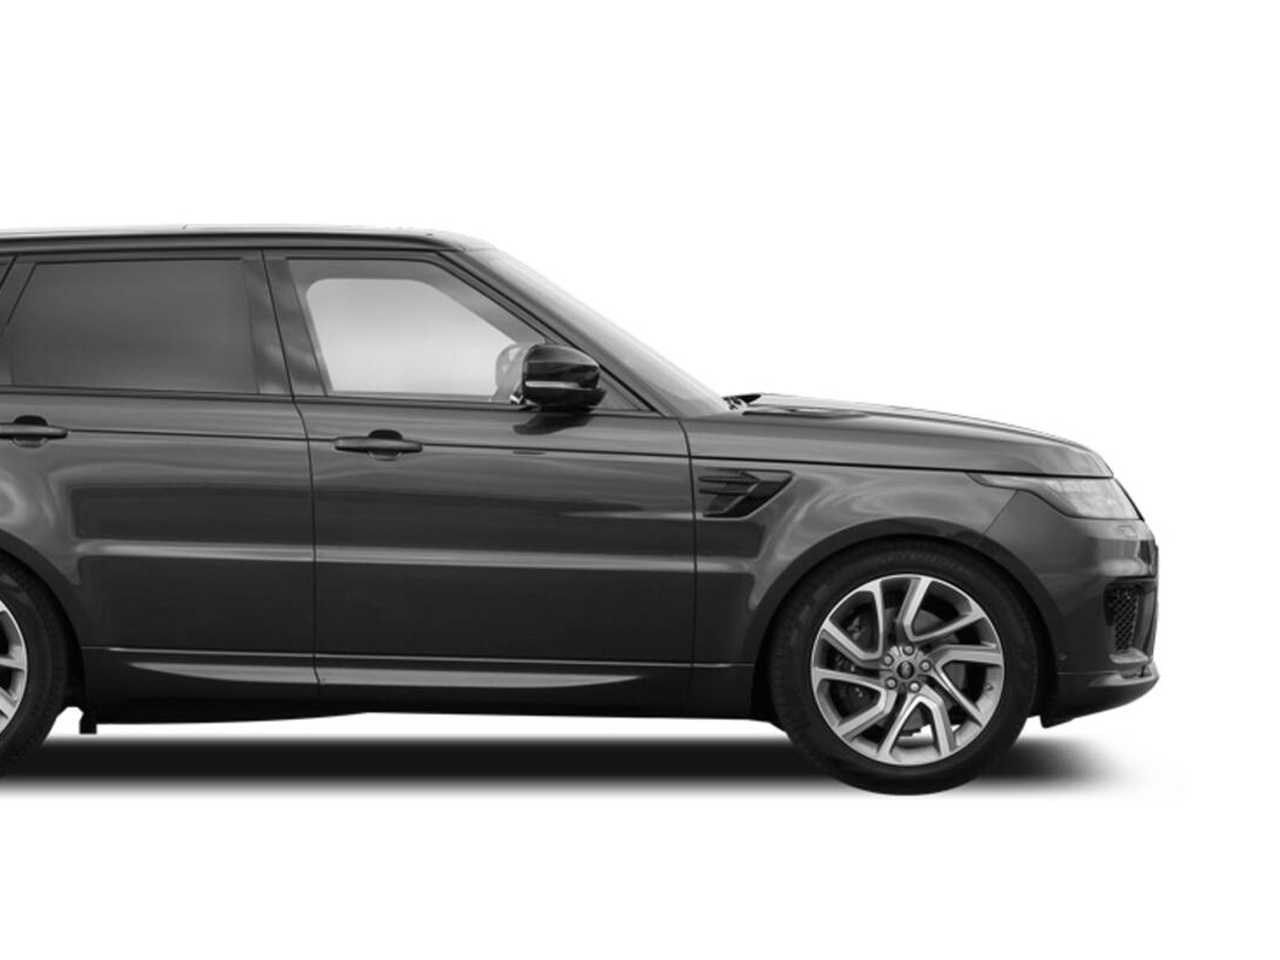 Range Rover Sport 3.0 P400 HST car for hire in London by Hertz Dream Collection